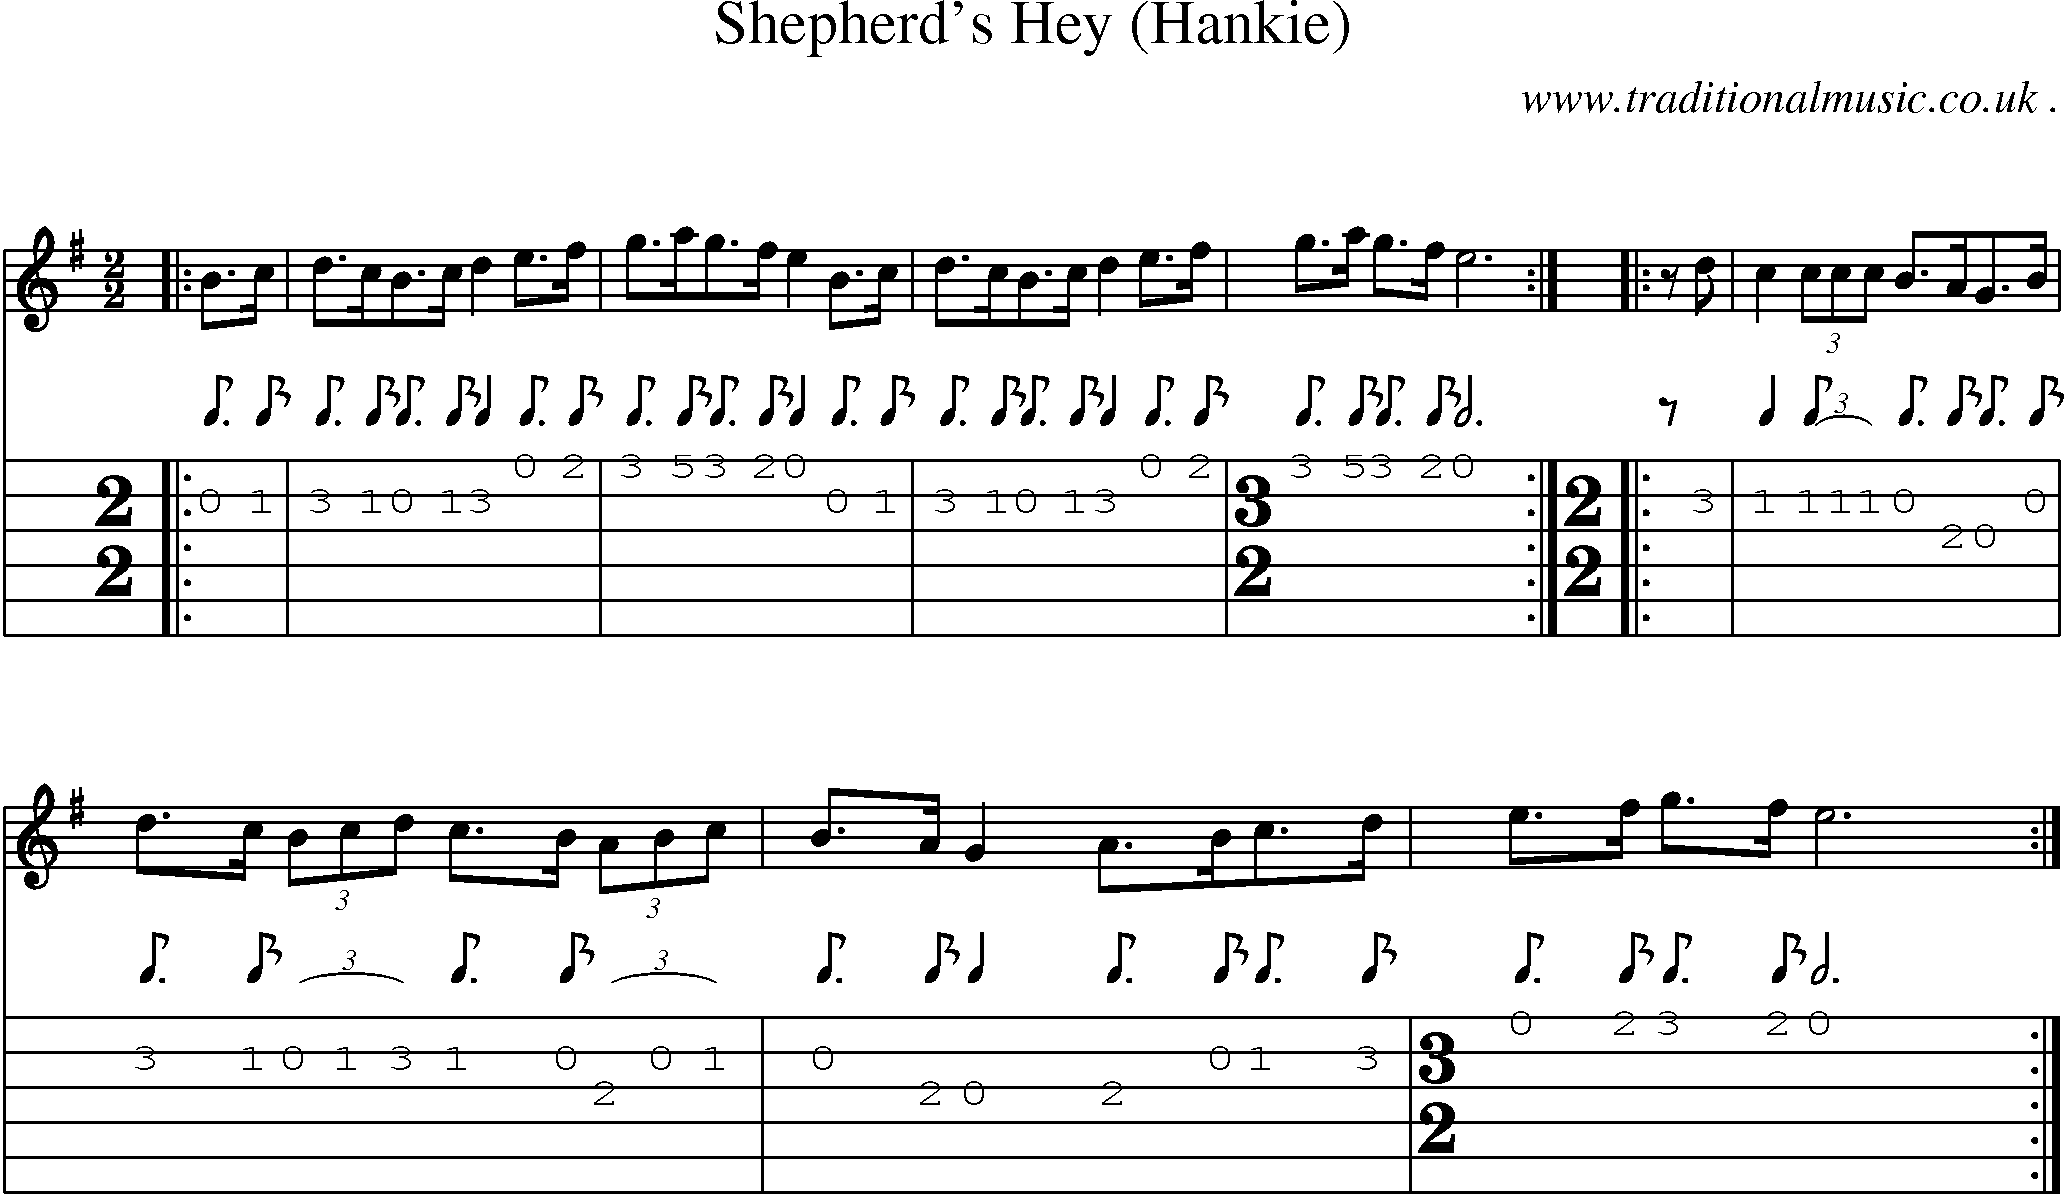 Sheet-Music and Guitar Tabs for Shepherds Hey (hankie)